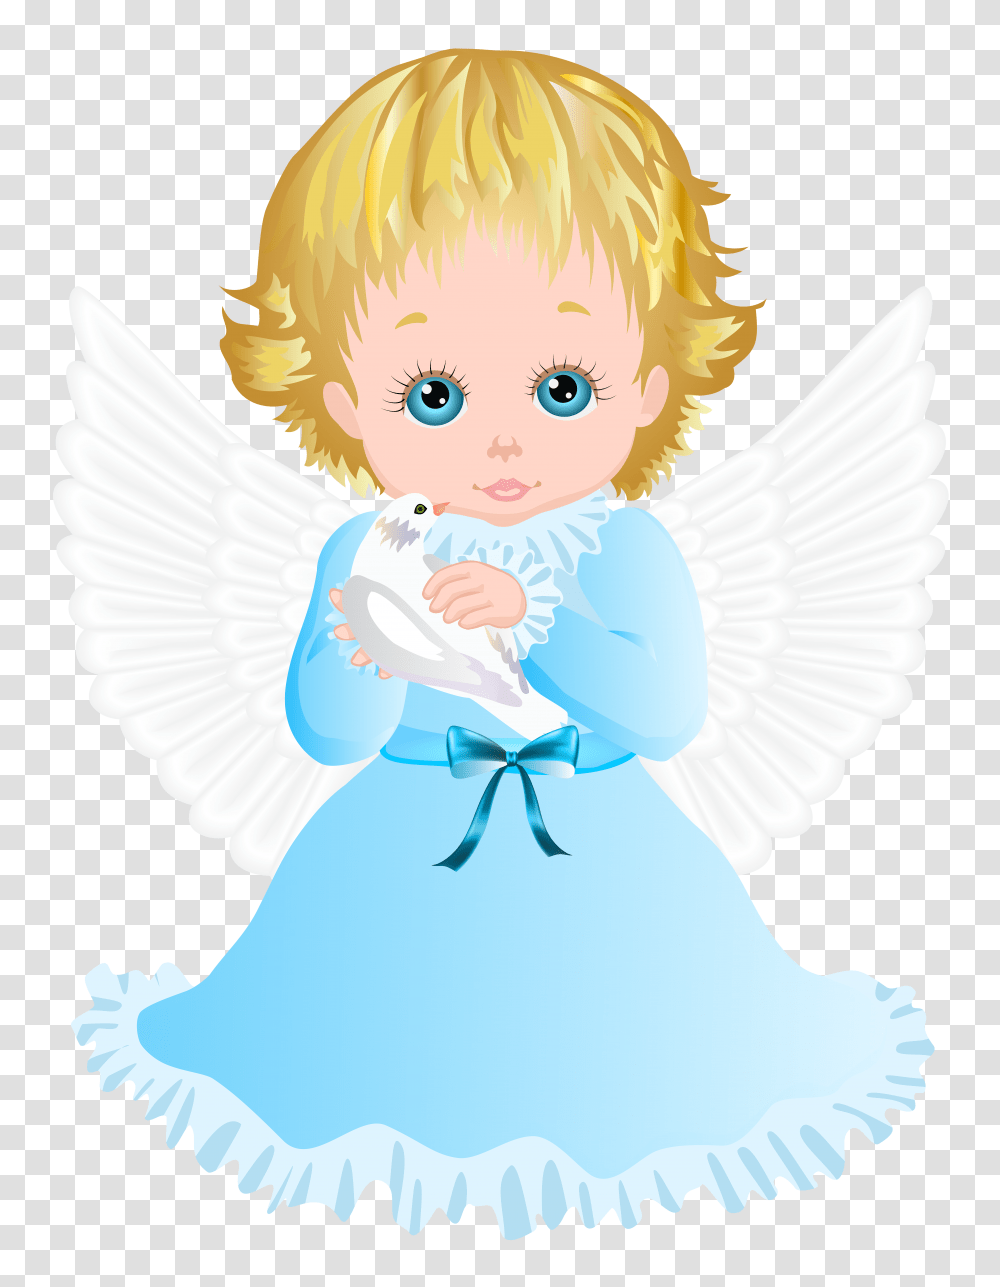 Cute Angel With White Dove Clip Art Image, Archangel Transparent Png